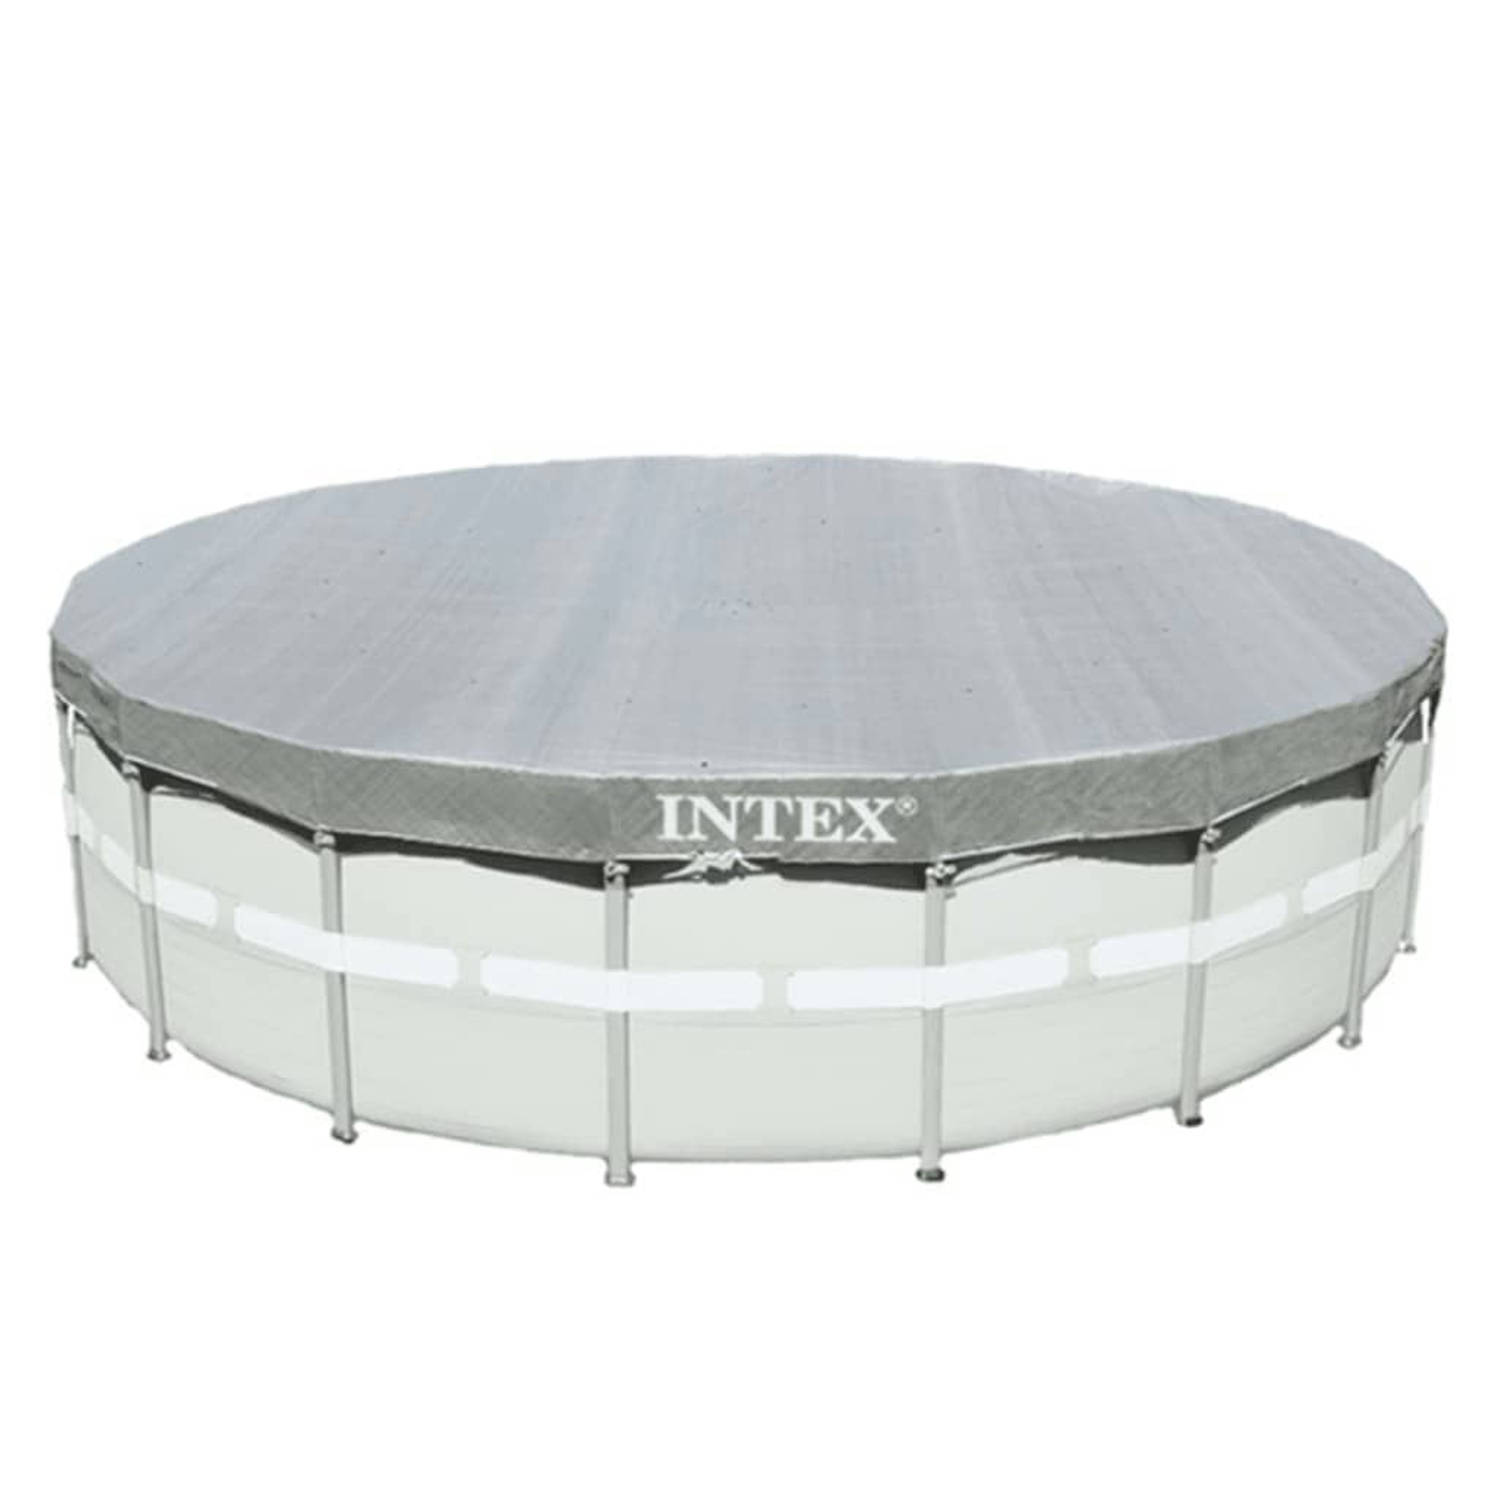 Intex Zwembadhoes Deluxe rond 549 cm 28041